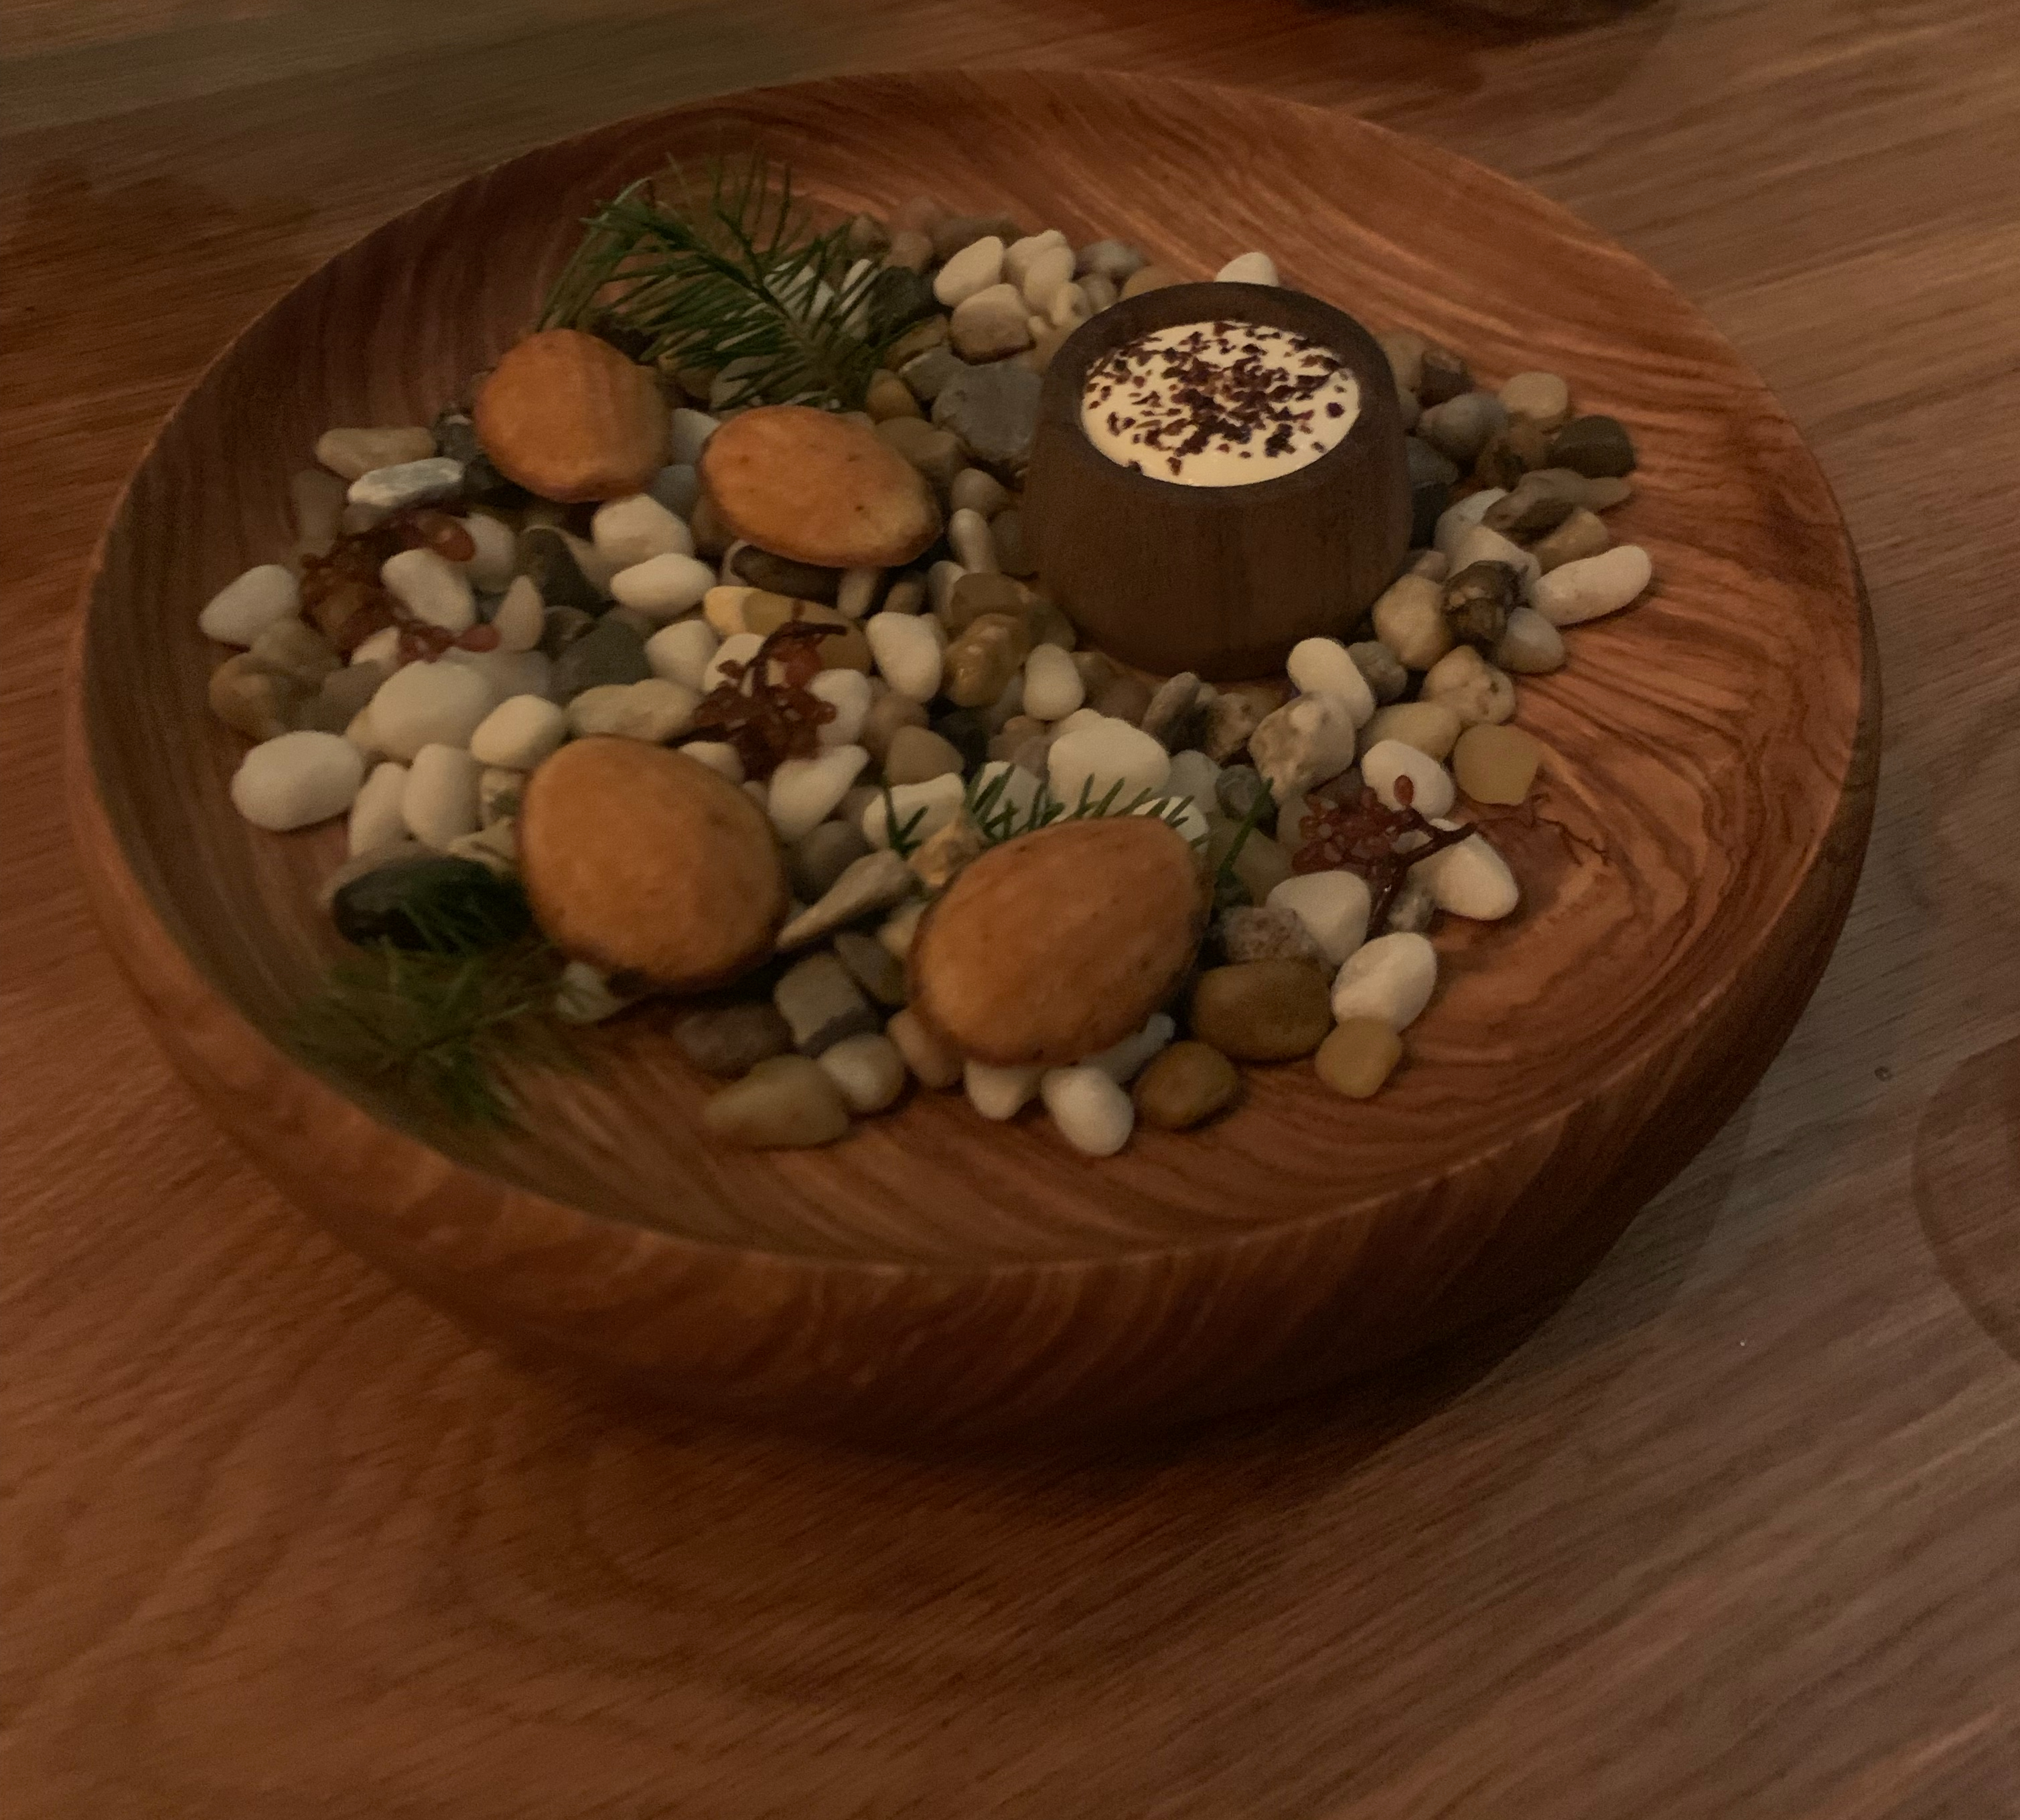 Four madeline cookies served atop a bed of rocks collected at the beach, with a pot of creme fresh for dipping next to them